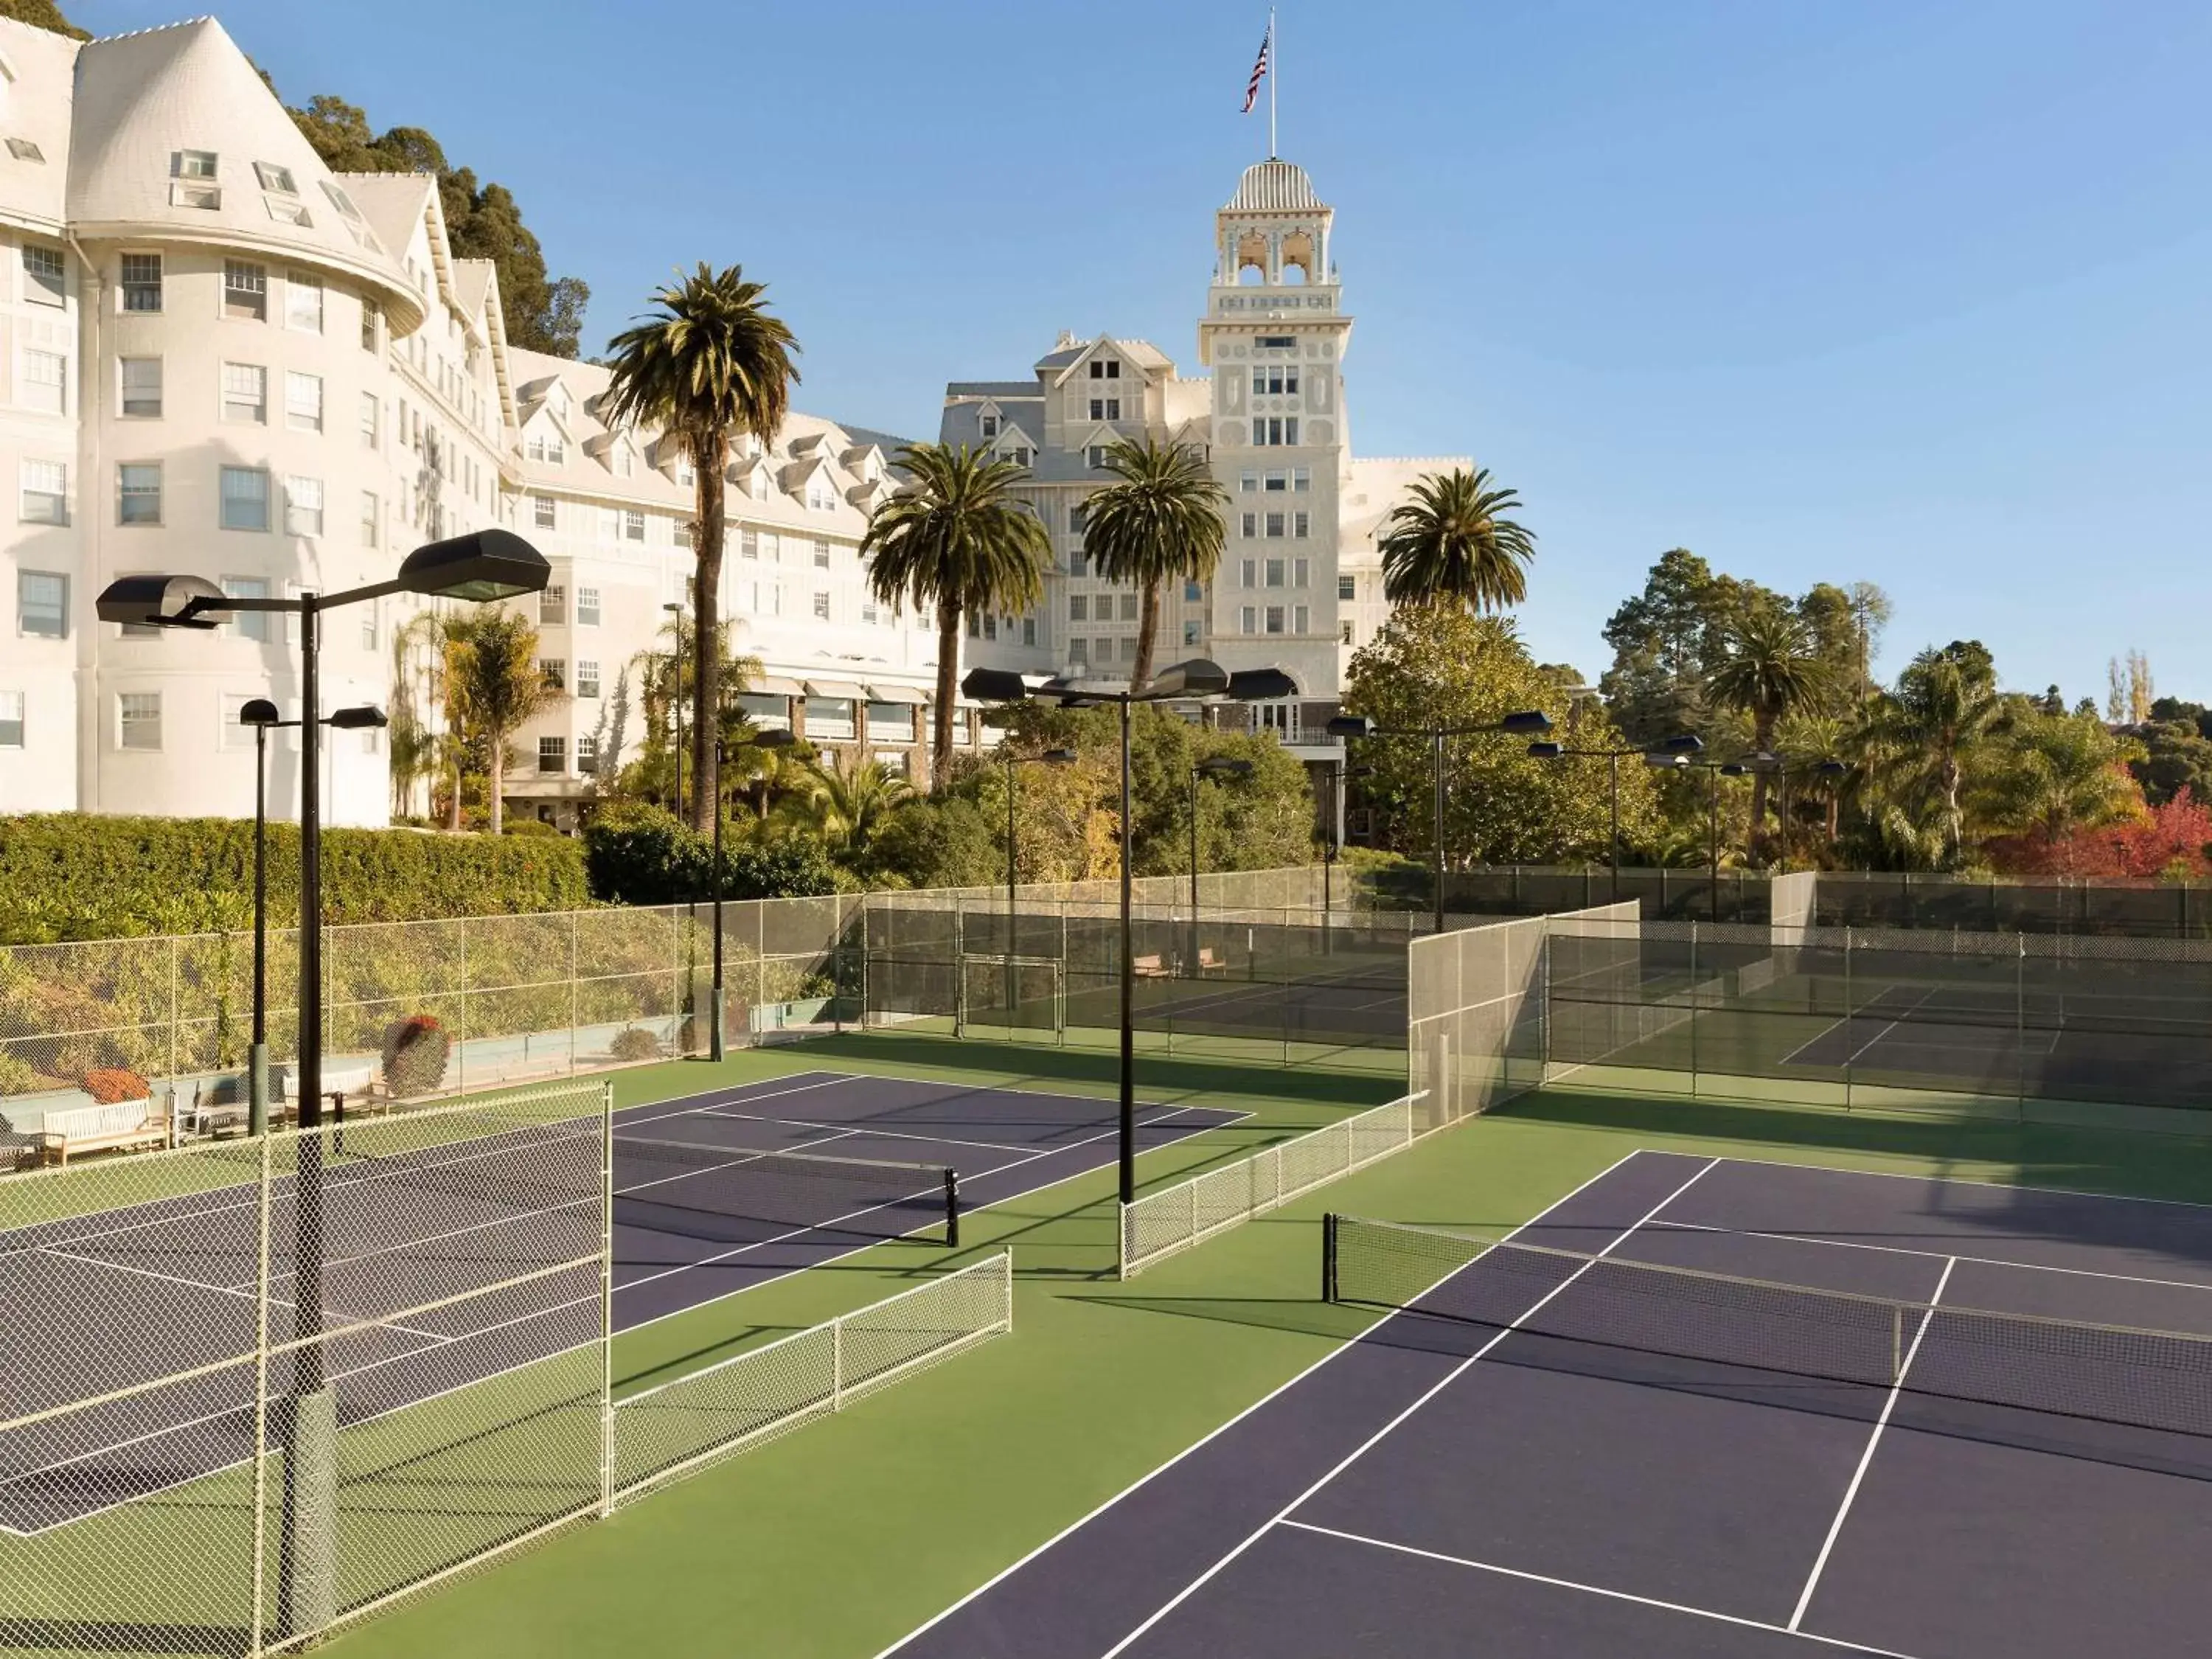 On site, Tennis/Squash in The Claremont Club & Spa, A Fairmont Hotel